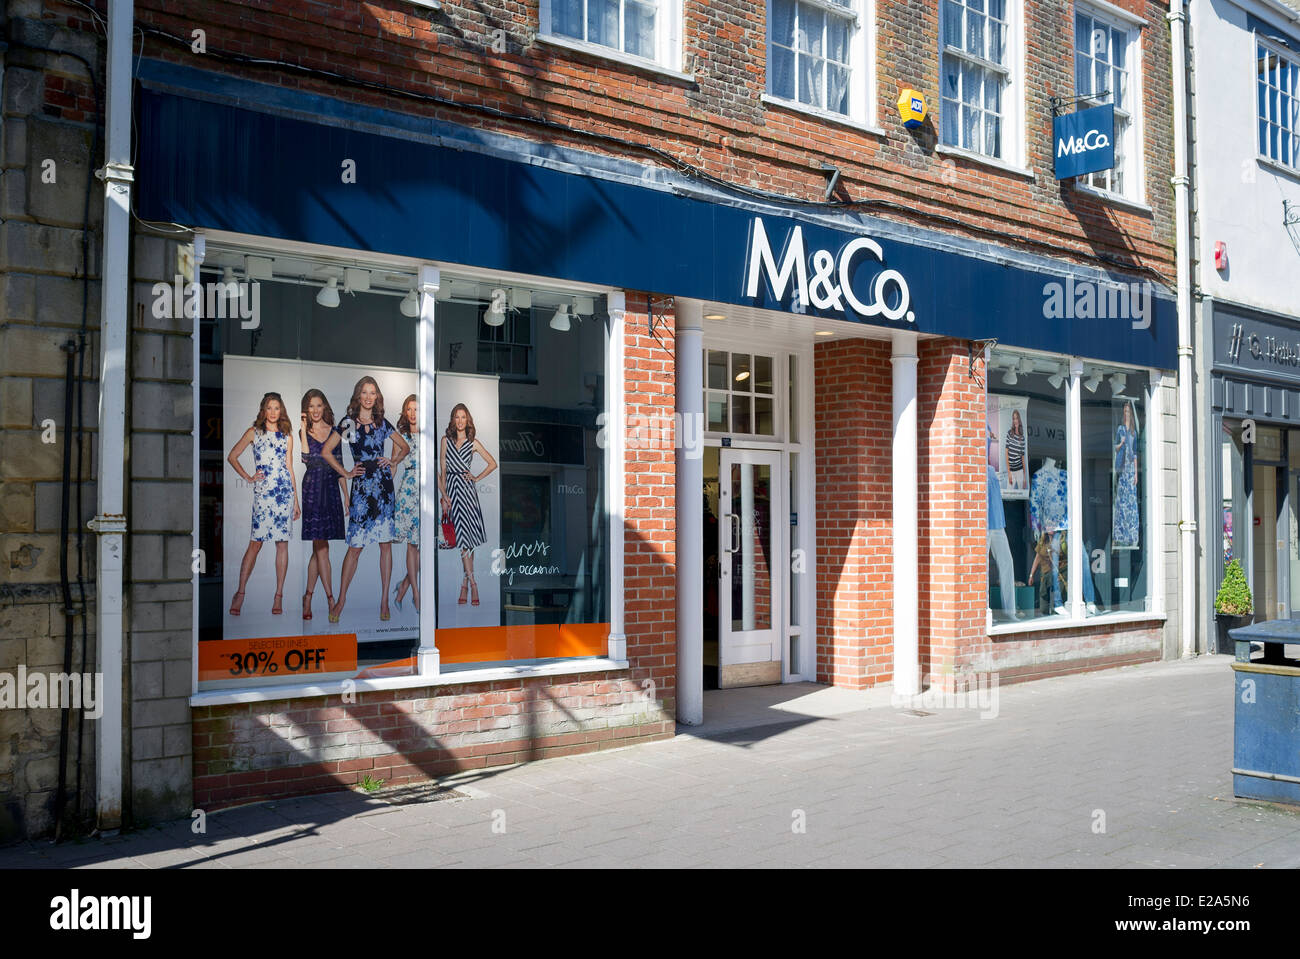 M&Co fashion store in country town in UK Stock Photo